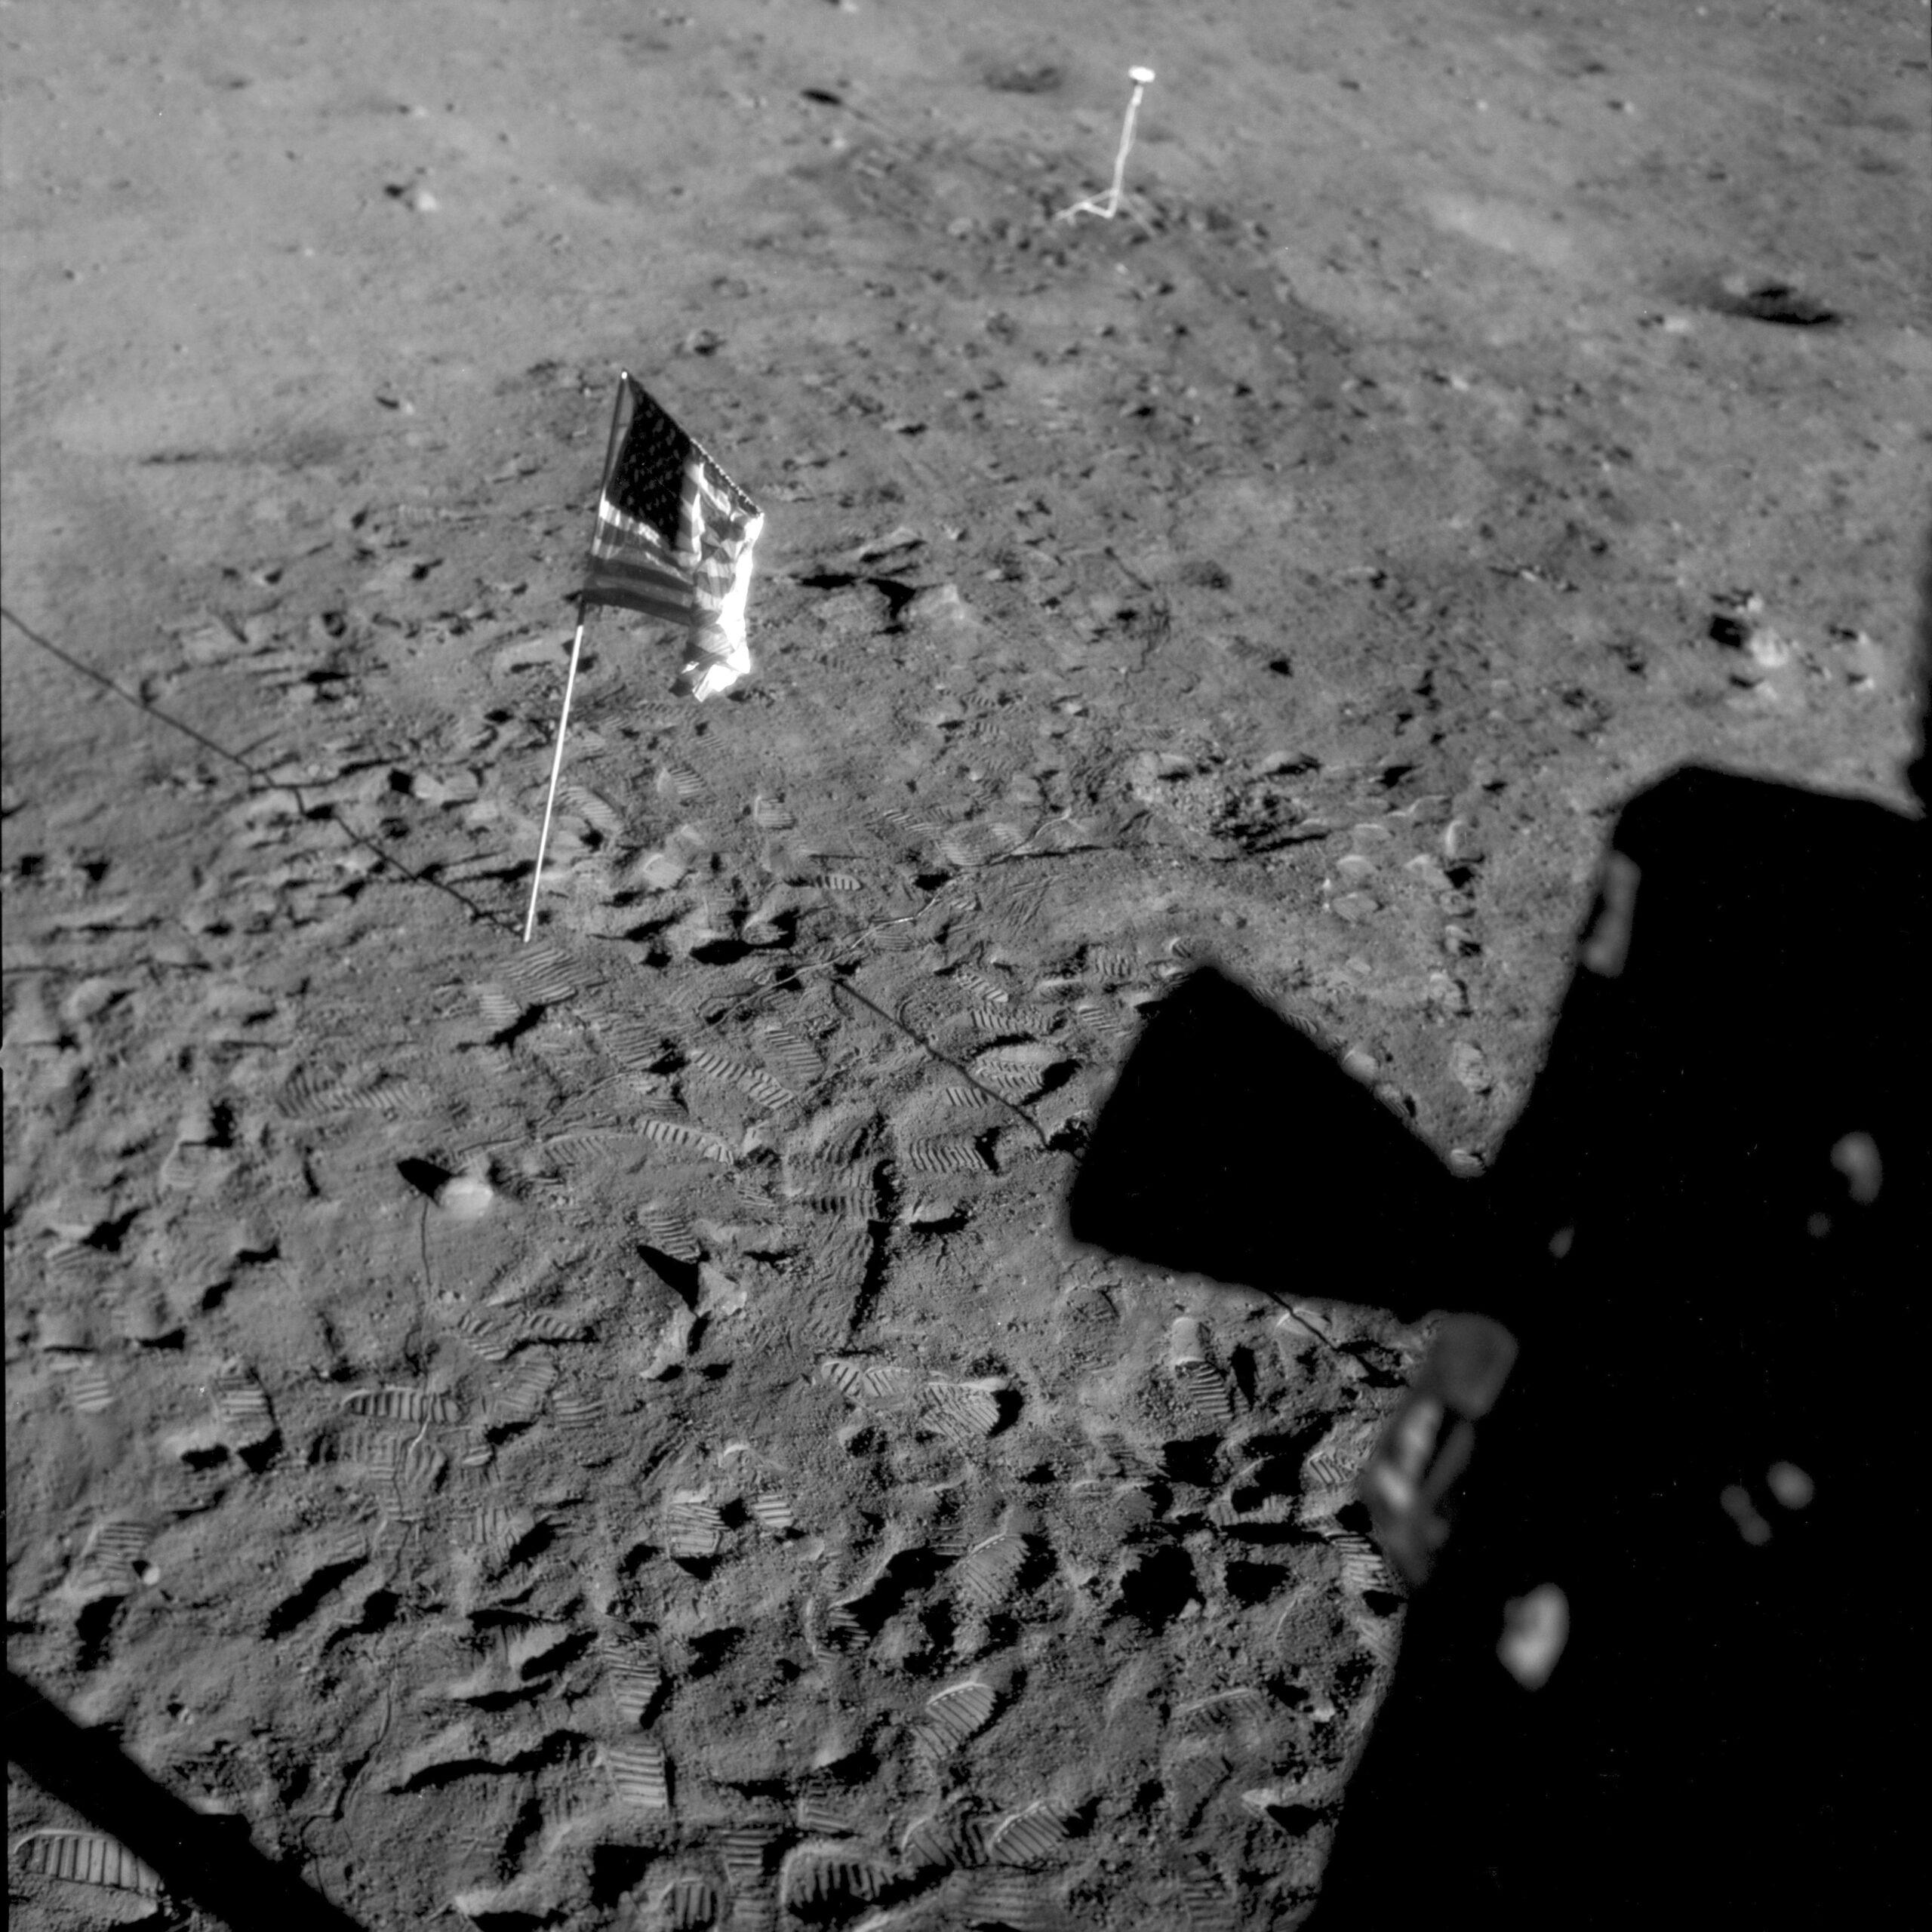 This July 21, 1969 photo made available by NASA shows the U.S. flag planted at Tranquility Base on the surface of the moon.